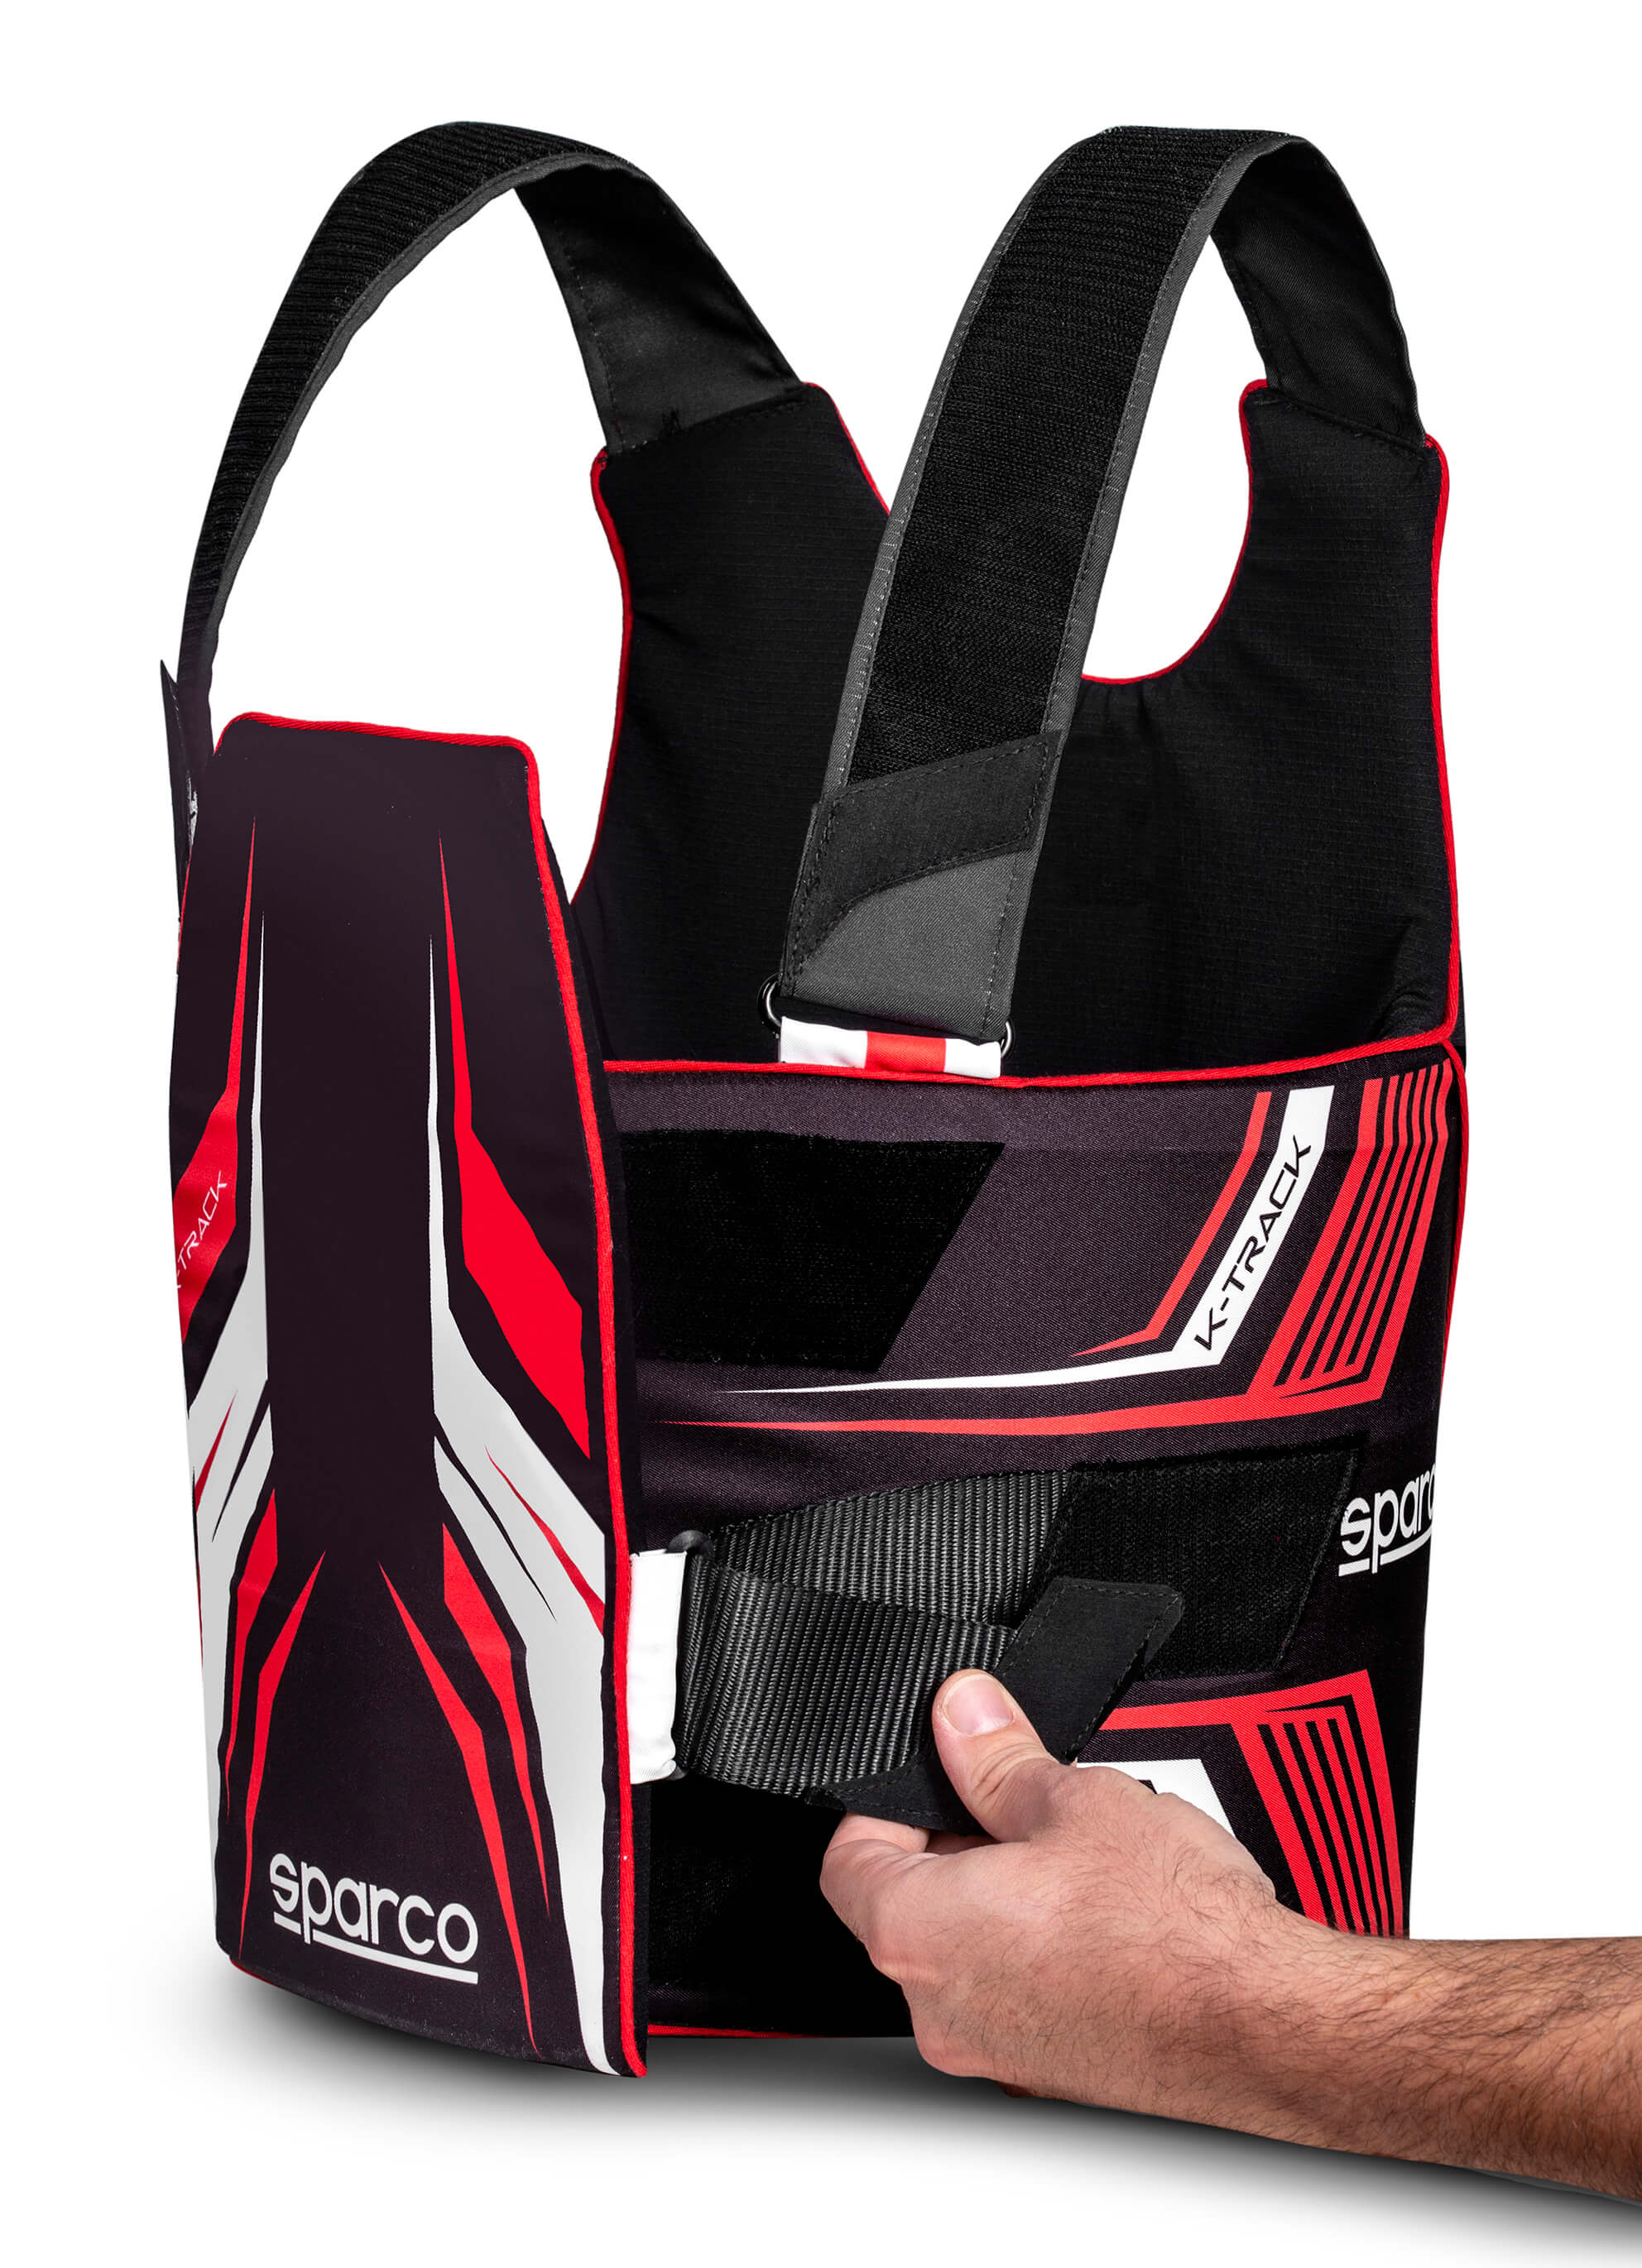 SPARCO 002406KNRRS2S K-TRACK Karting Rib Protector, FIA 8870-2018, black/red, size S Photo-4 